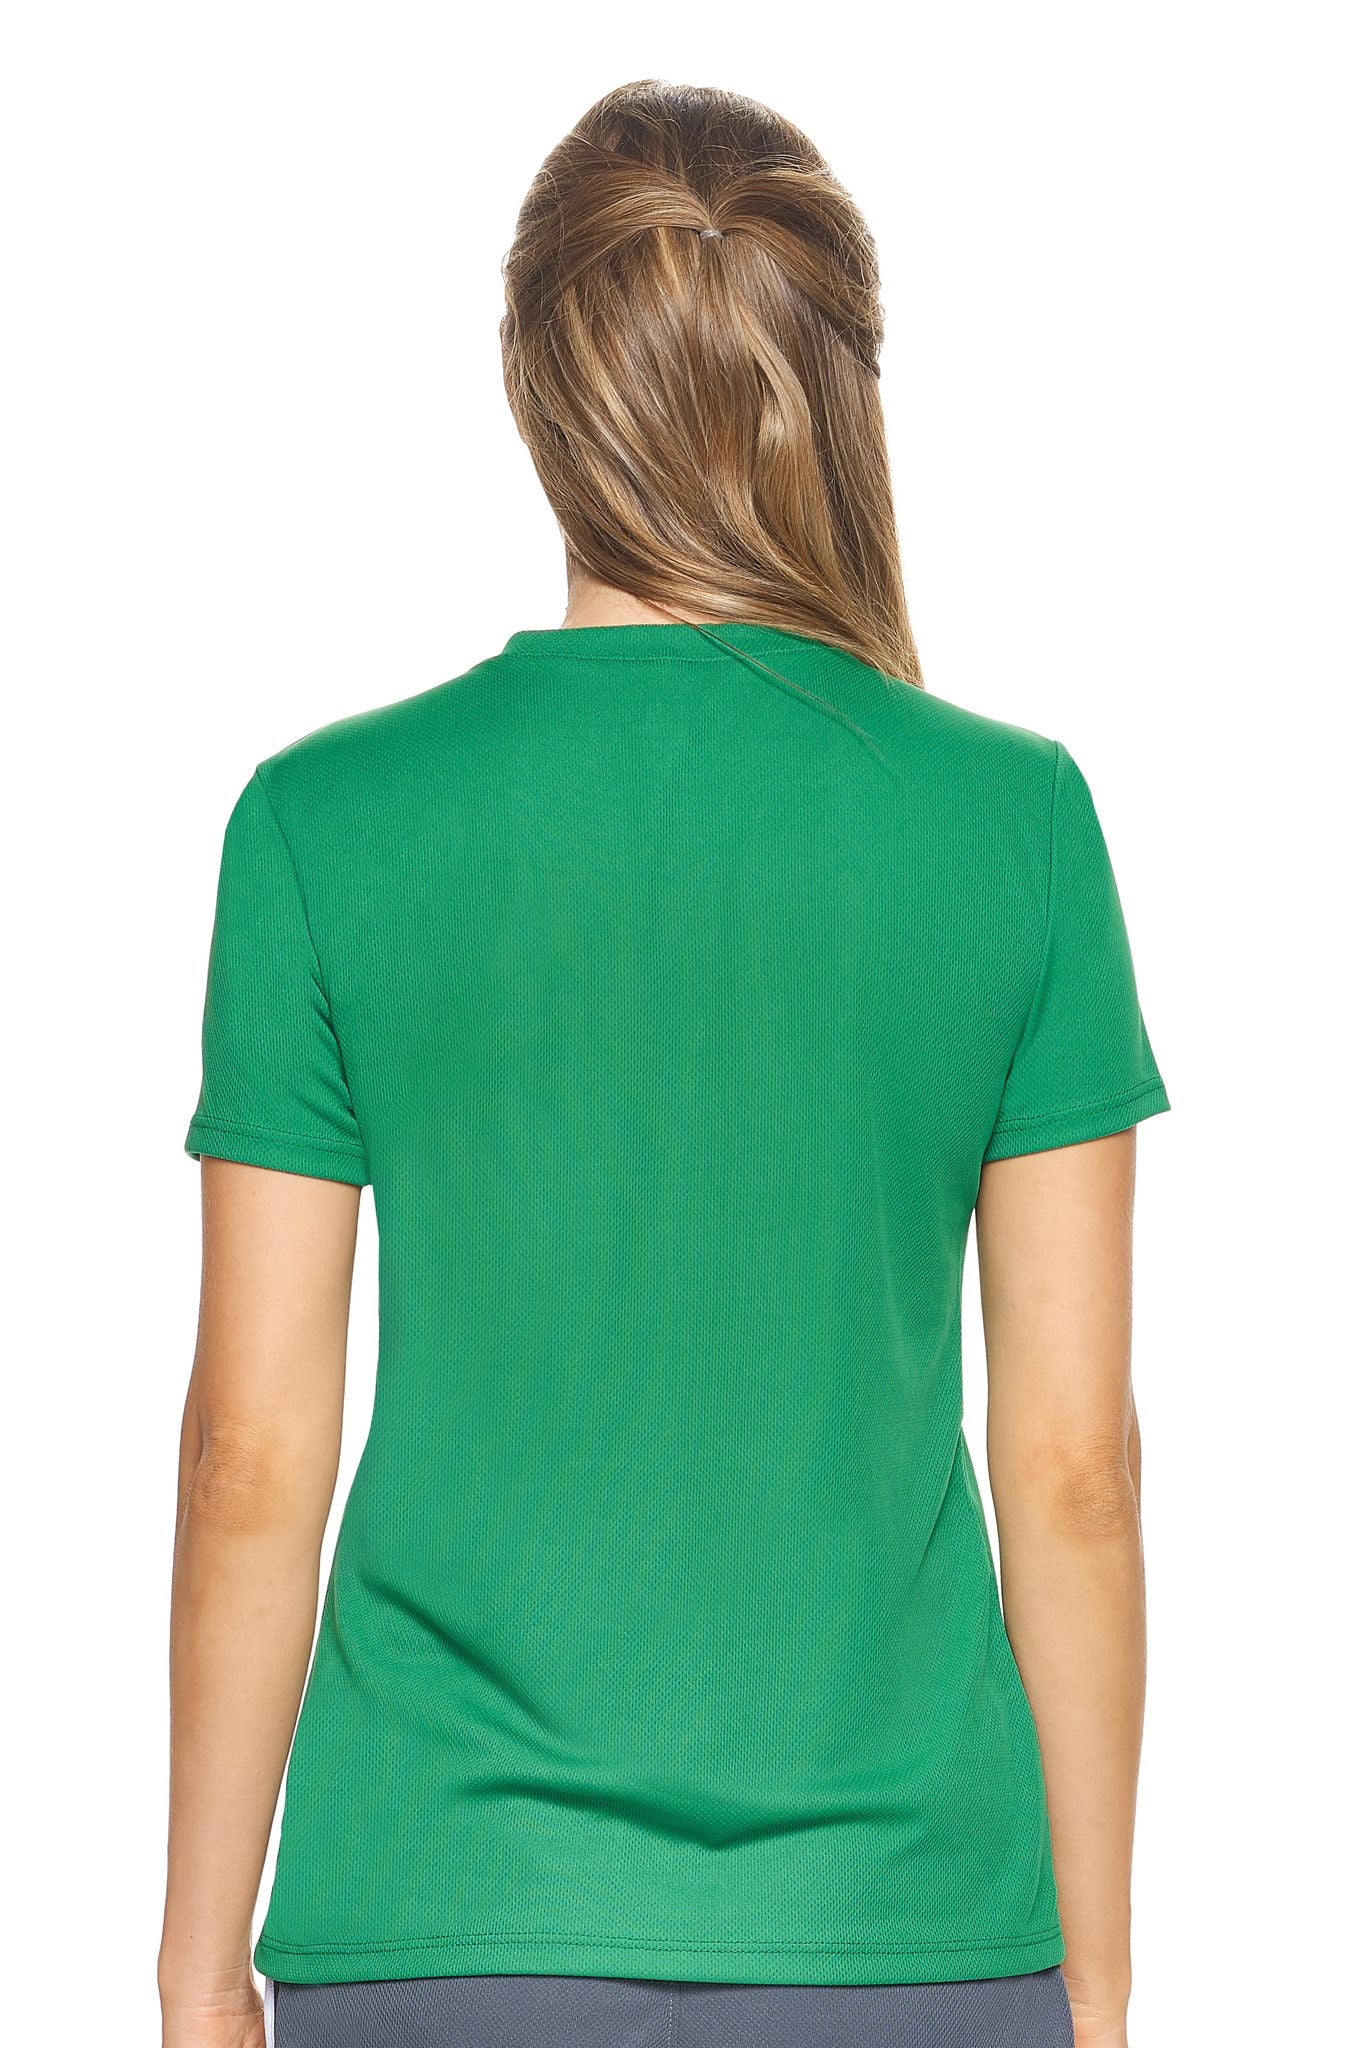 Expert Brand Retail Activewear Sportswear Made in USA Tec Tee T-shirt kelly green 3#color_kelly-green